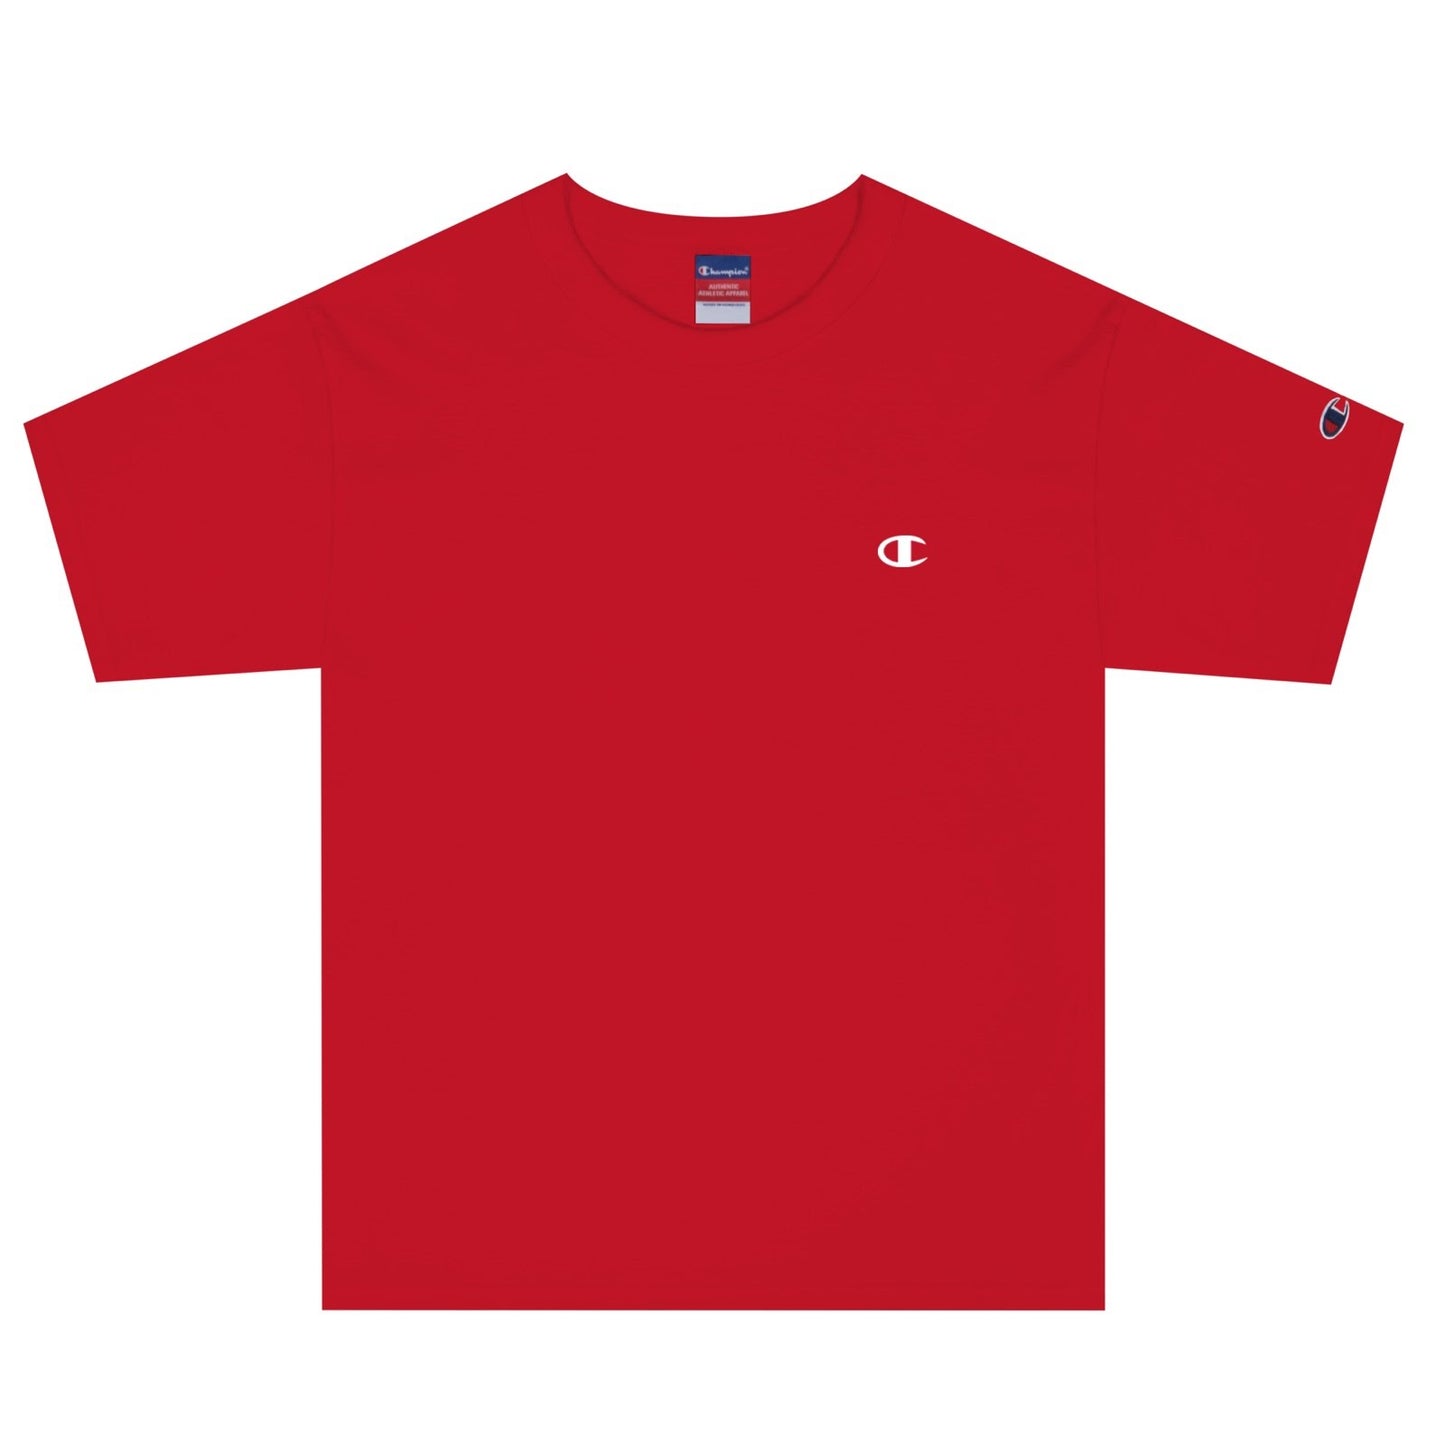 Limited Edition Test Press Tee (Red)